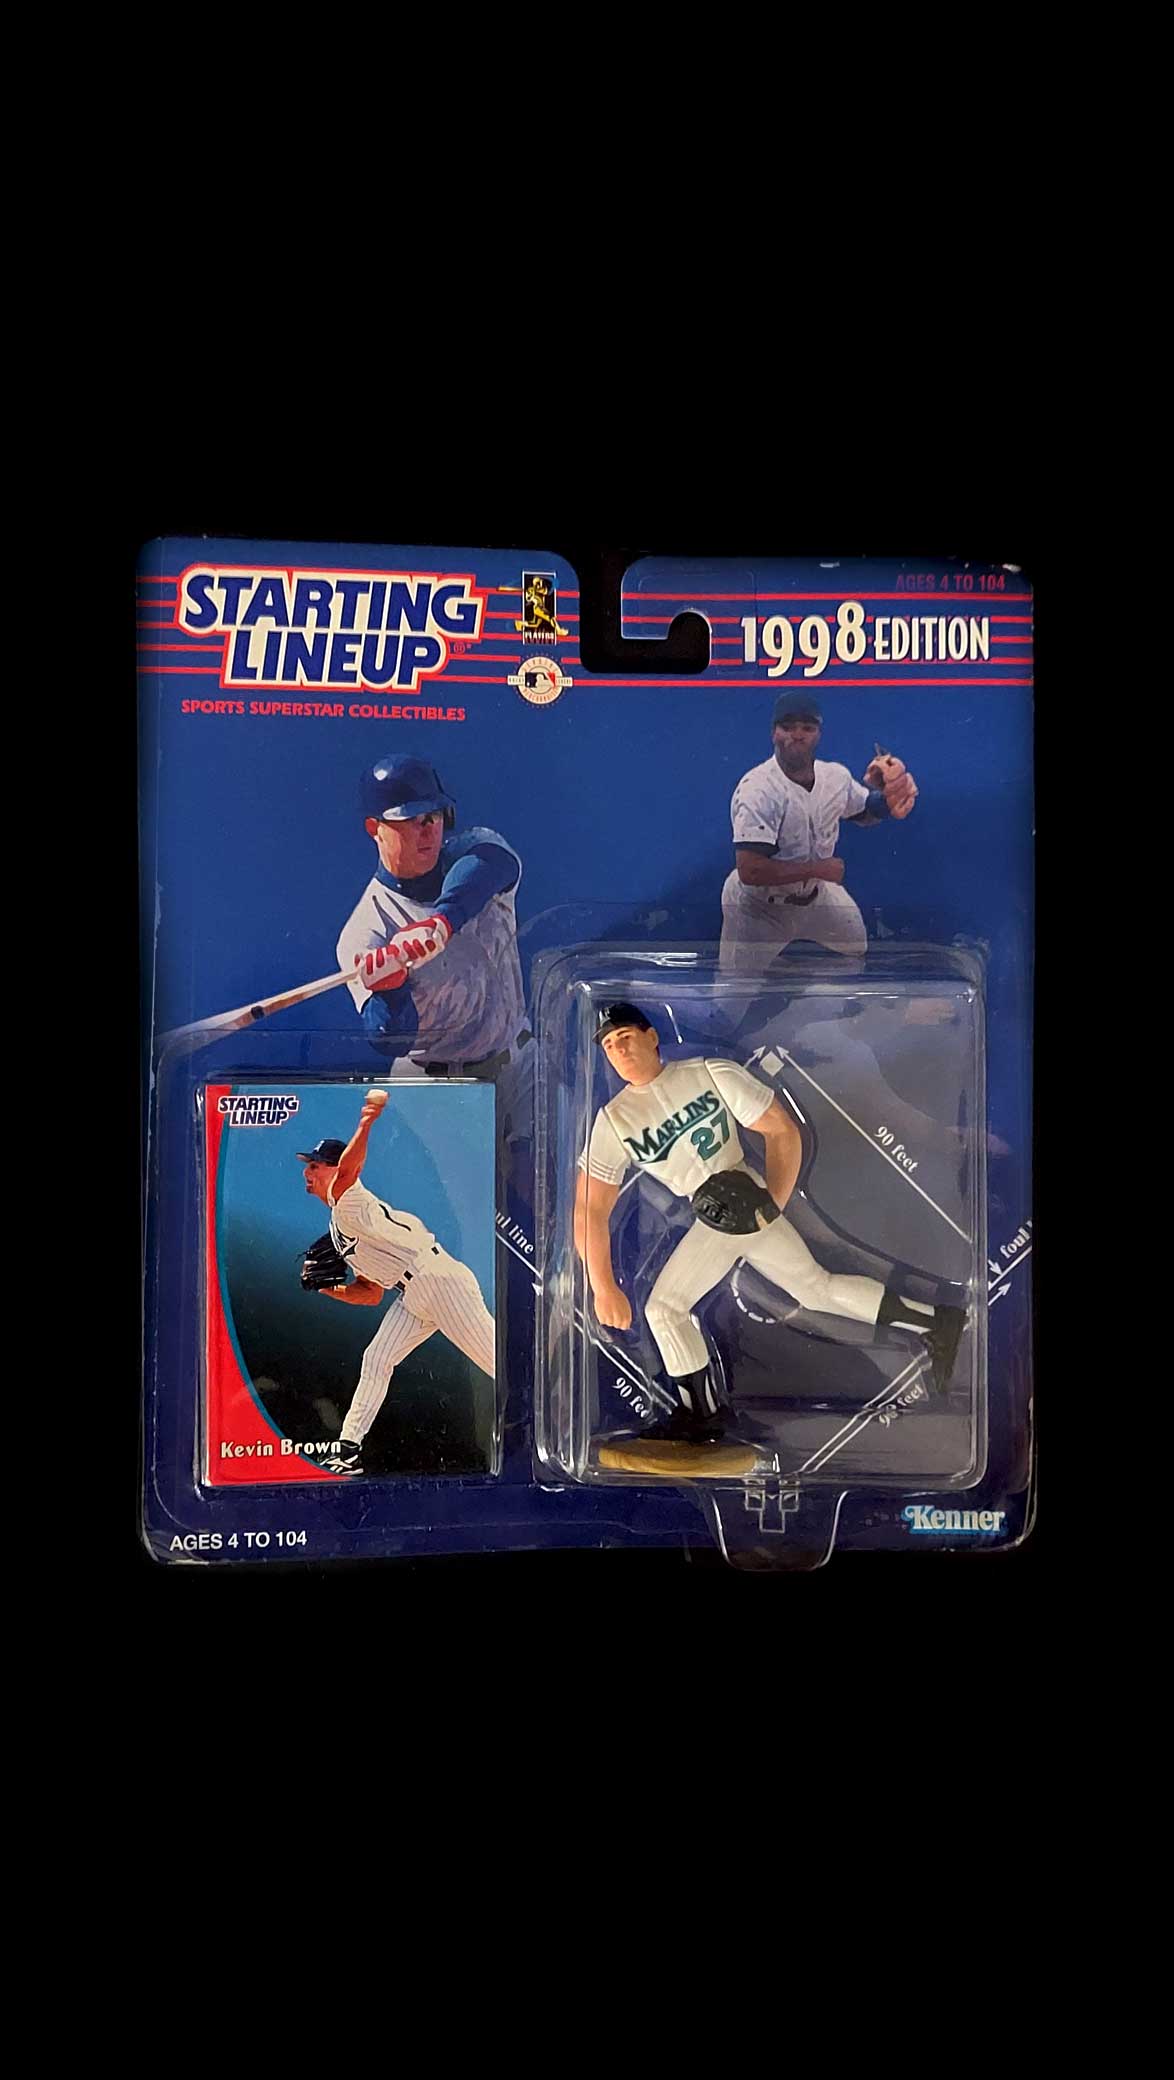 Kevin-Brown-Starting-Lineup-Sports-Superstar-Collectibles-1998-Edition